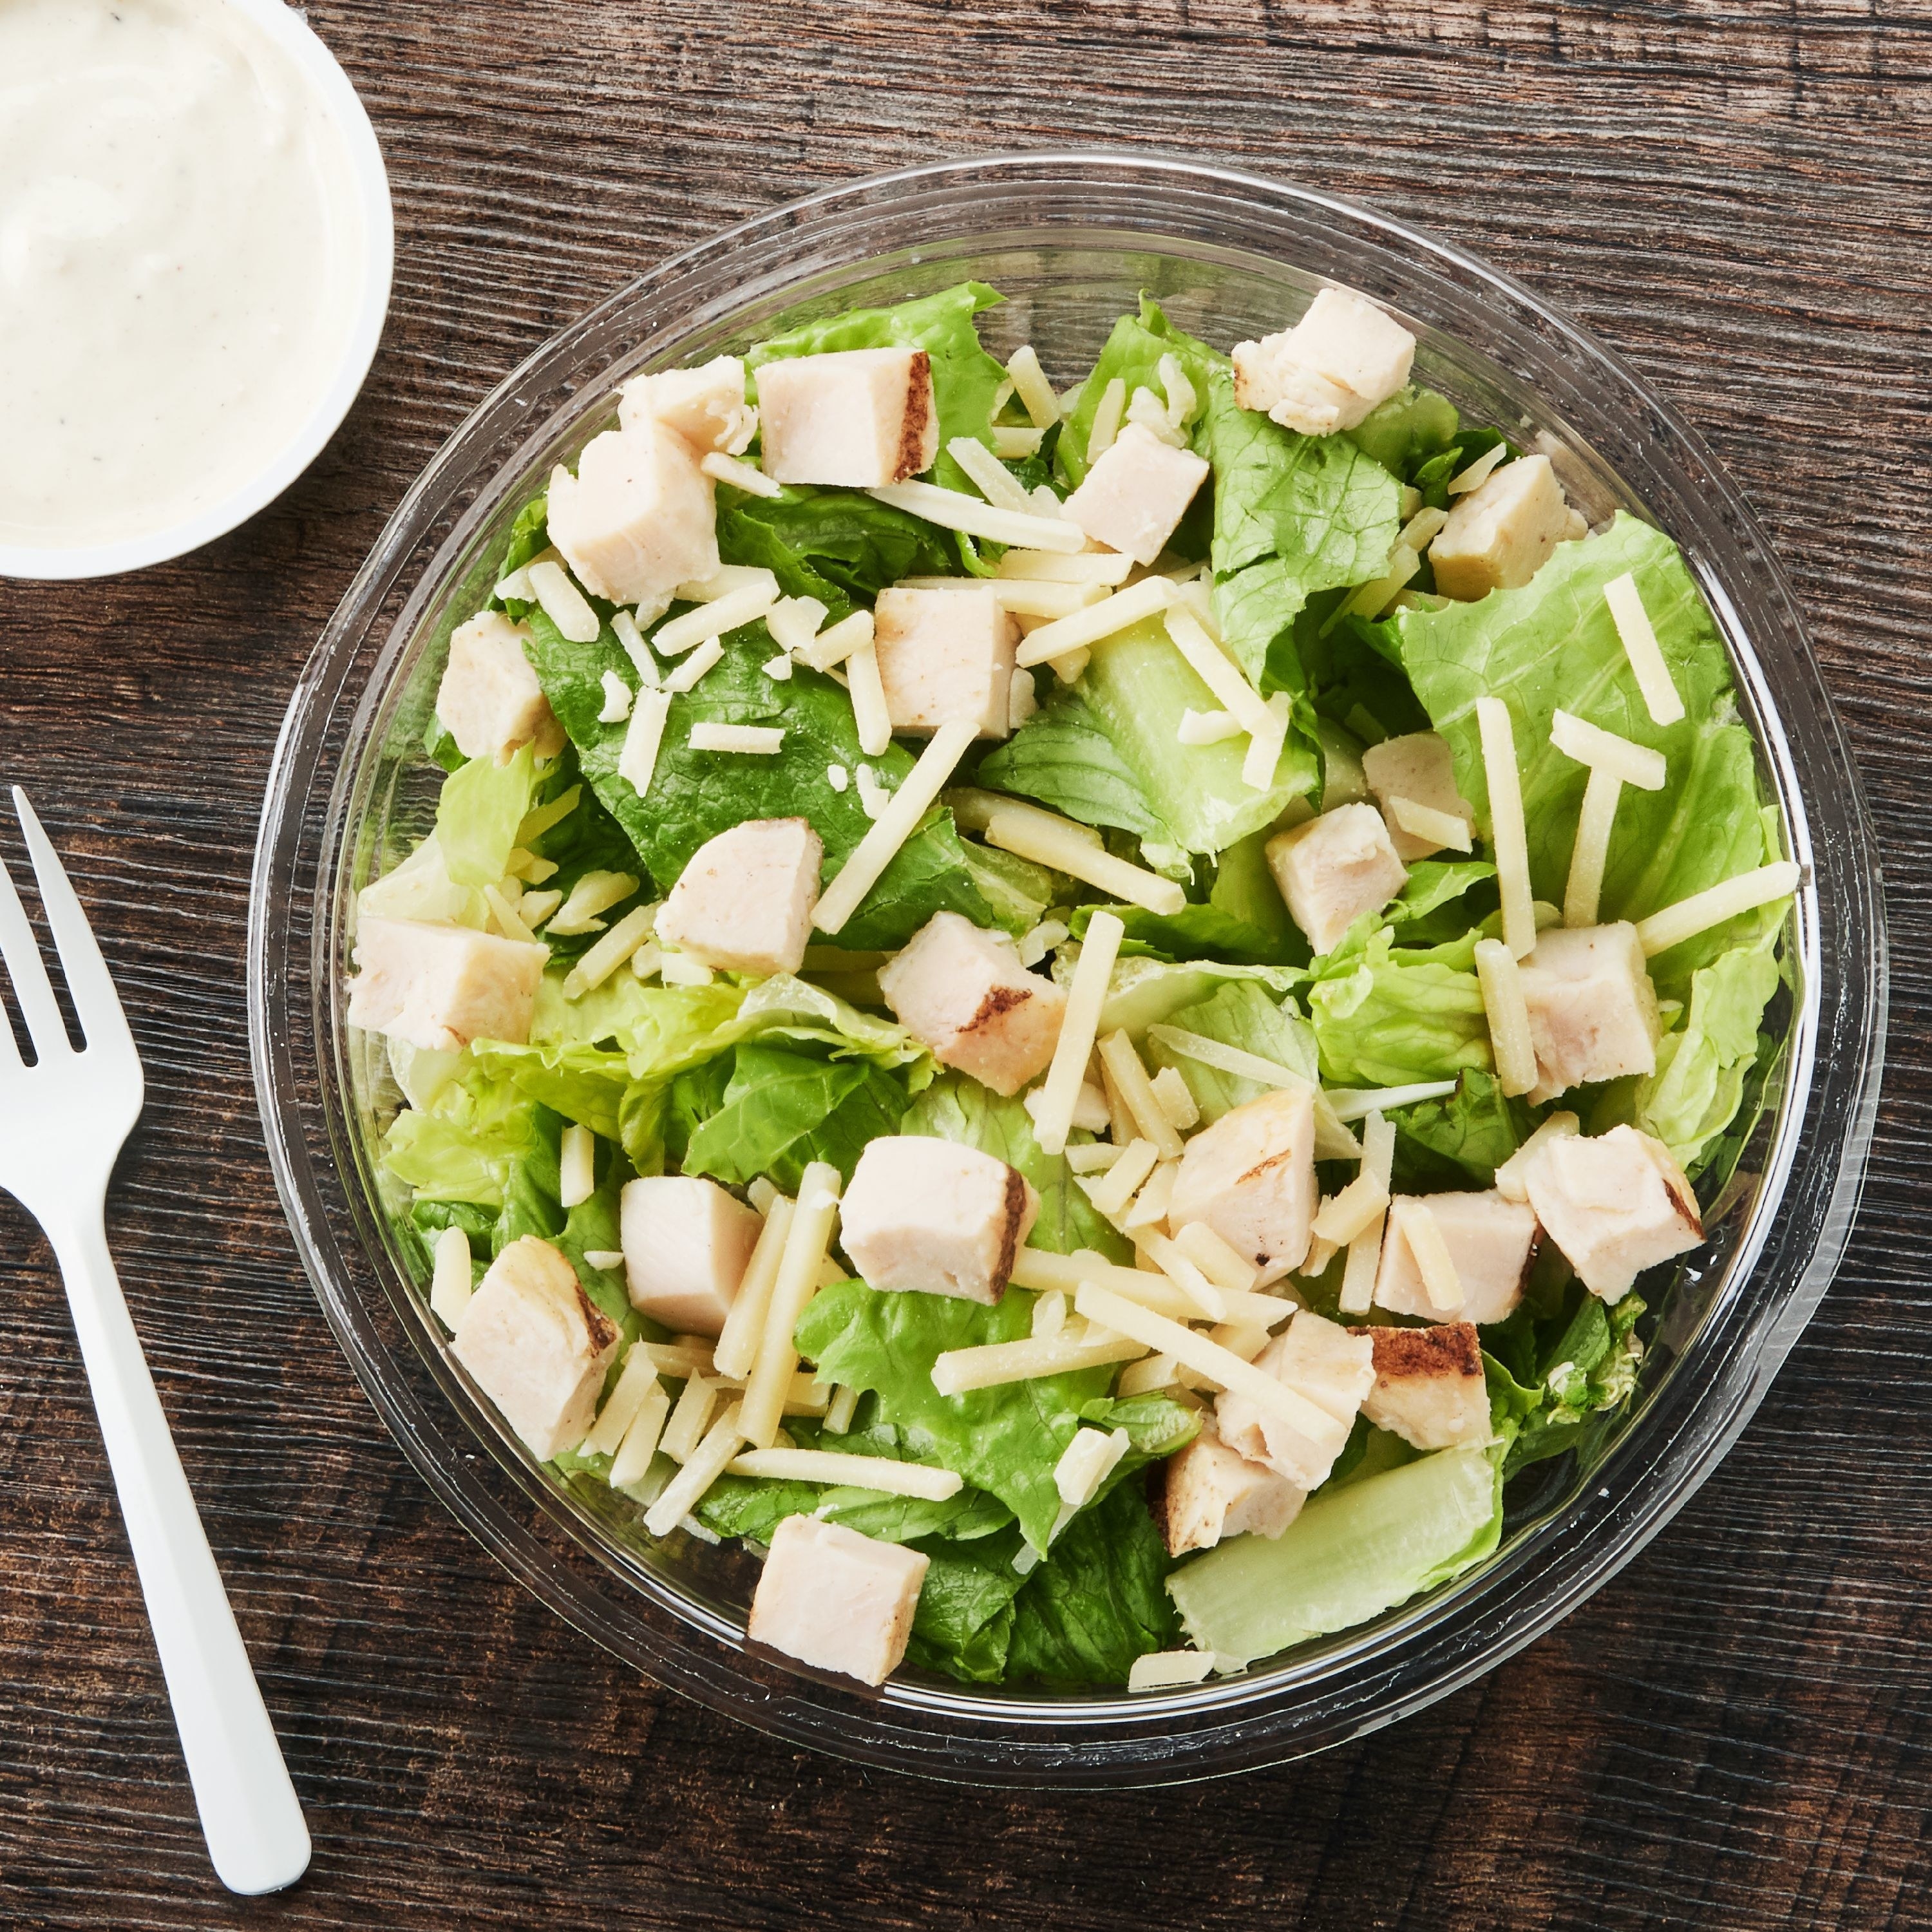 The Caesar salad tossed in a bowl